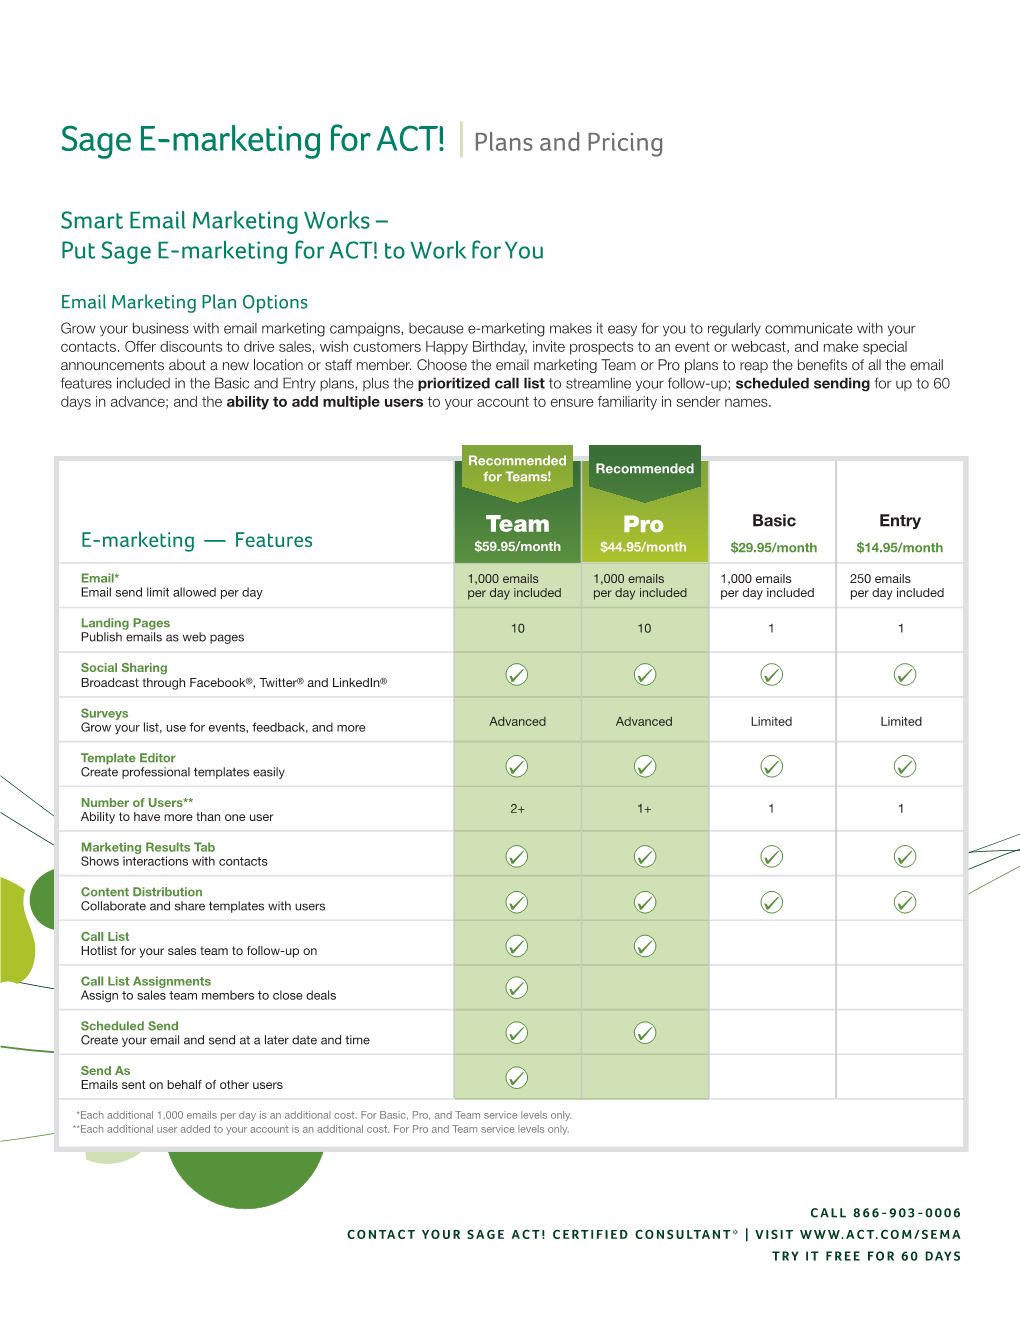 Sage E-Marketing for ACT! | Plans and Pricing